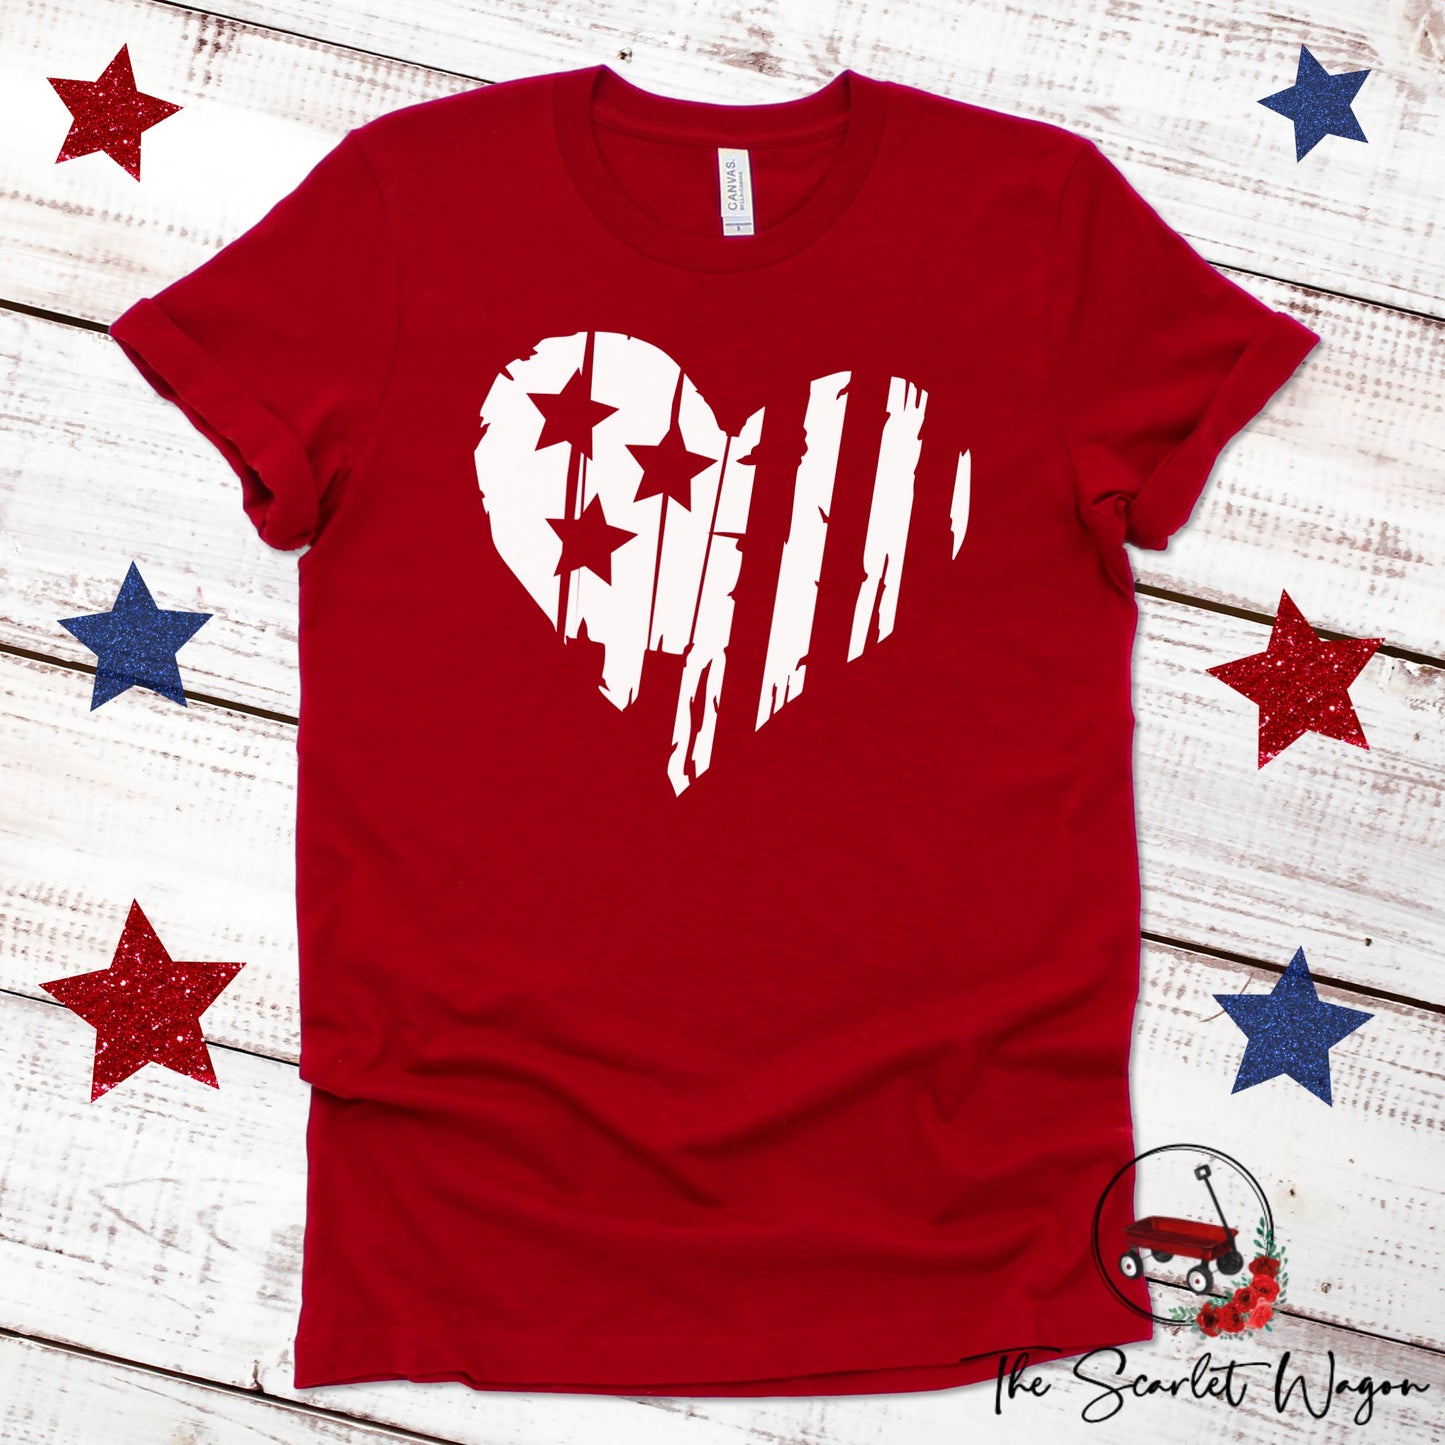 Distressed Heart-Shaped Flag Unisex Tee Patriotic Shirt The Scarlet Wagon Boutique Red XS 